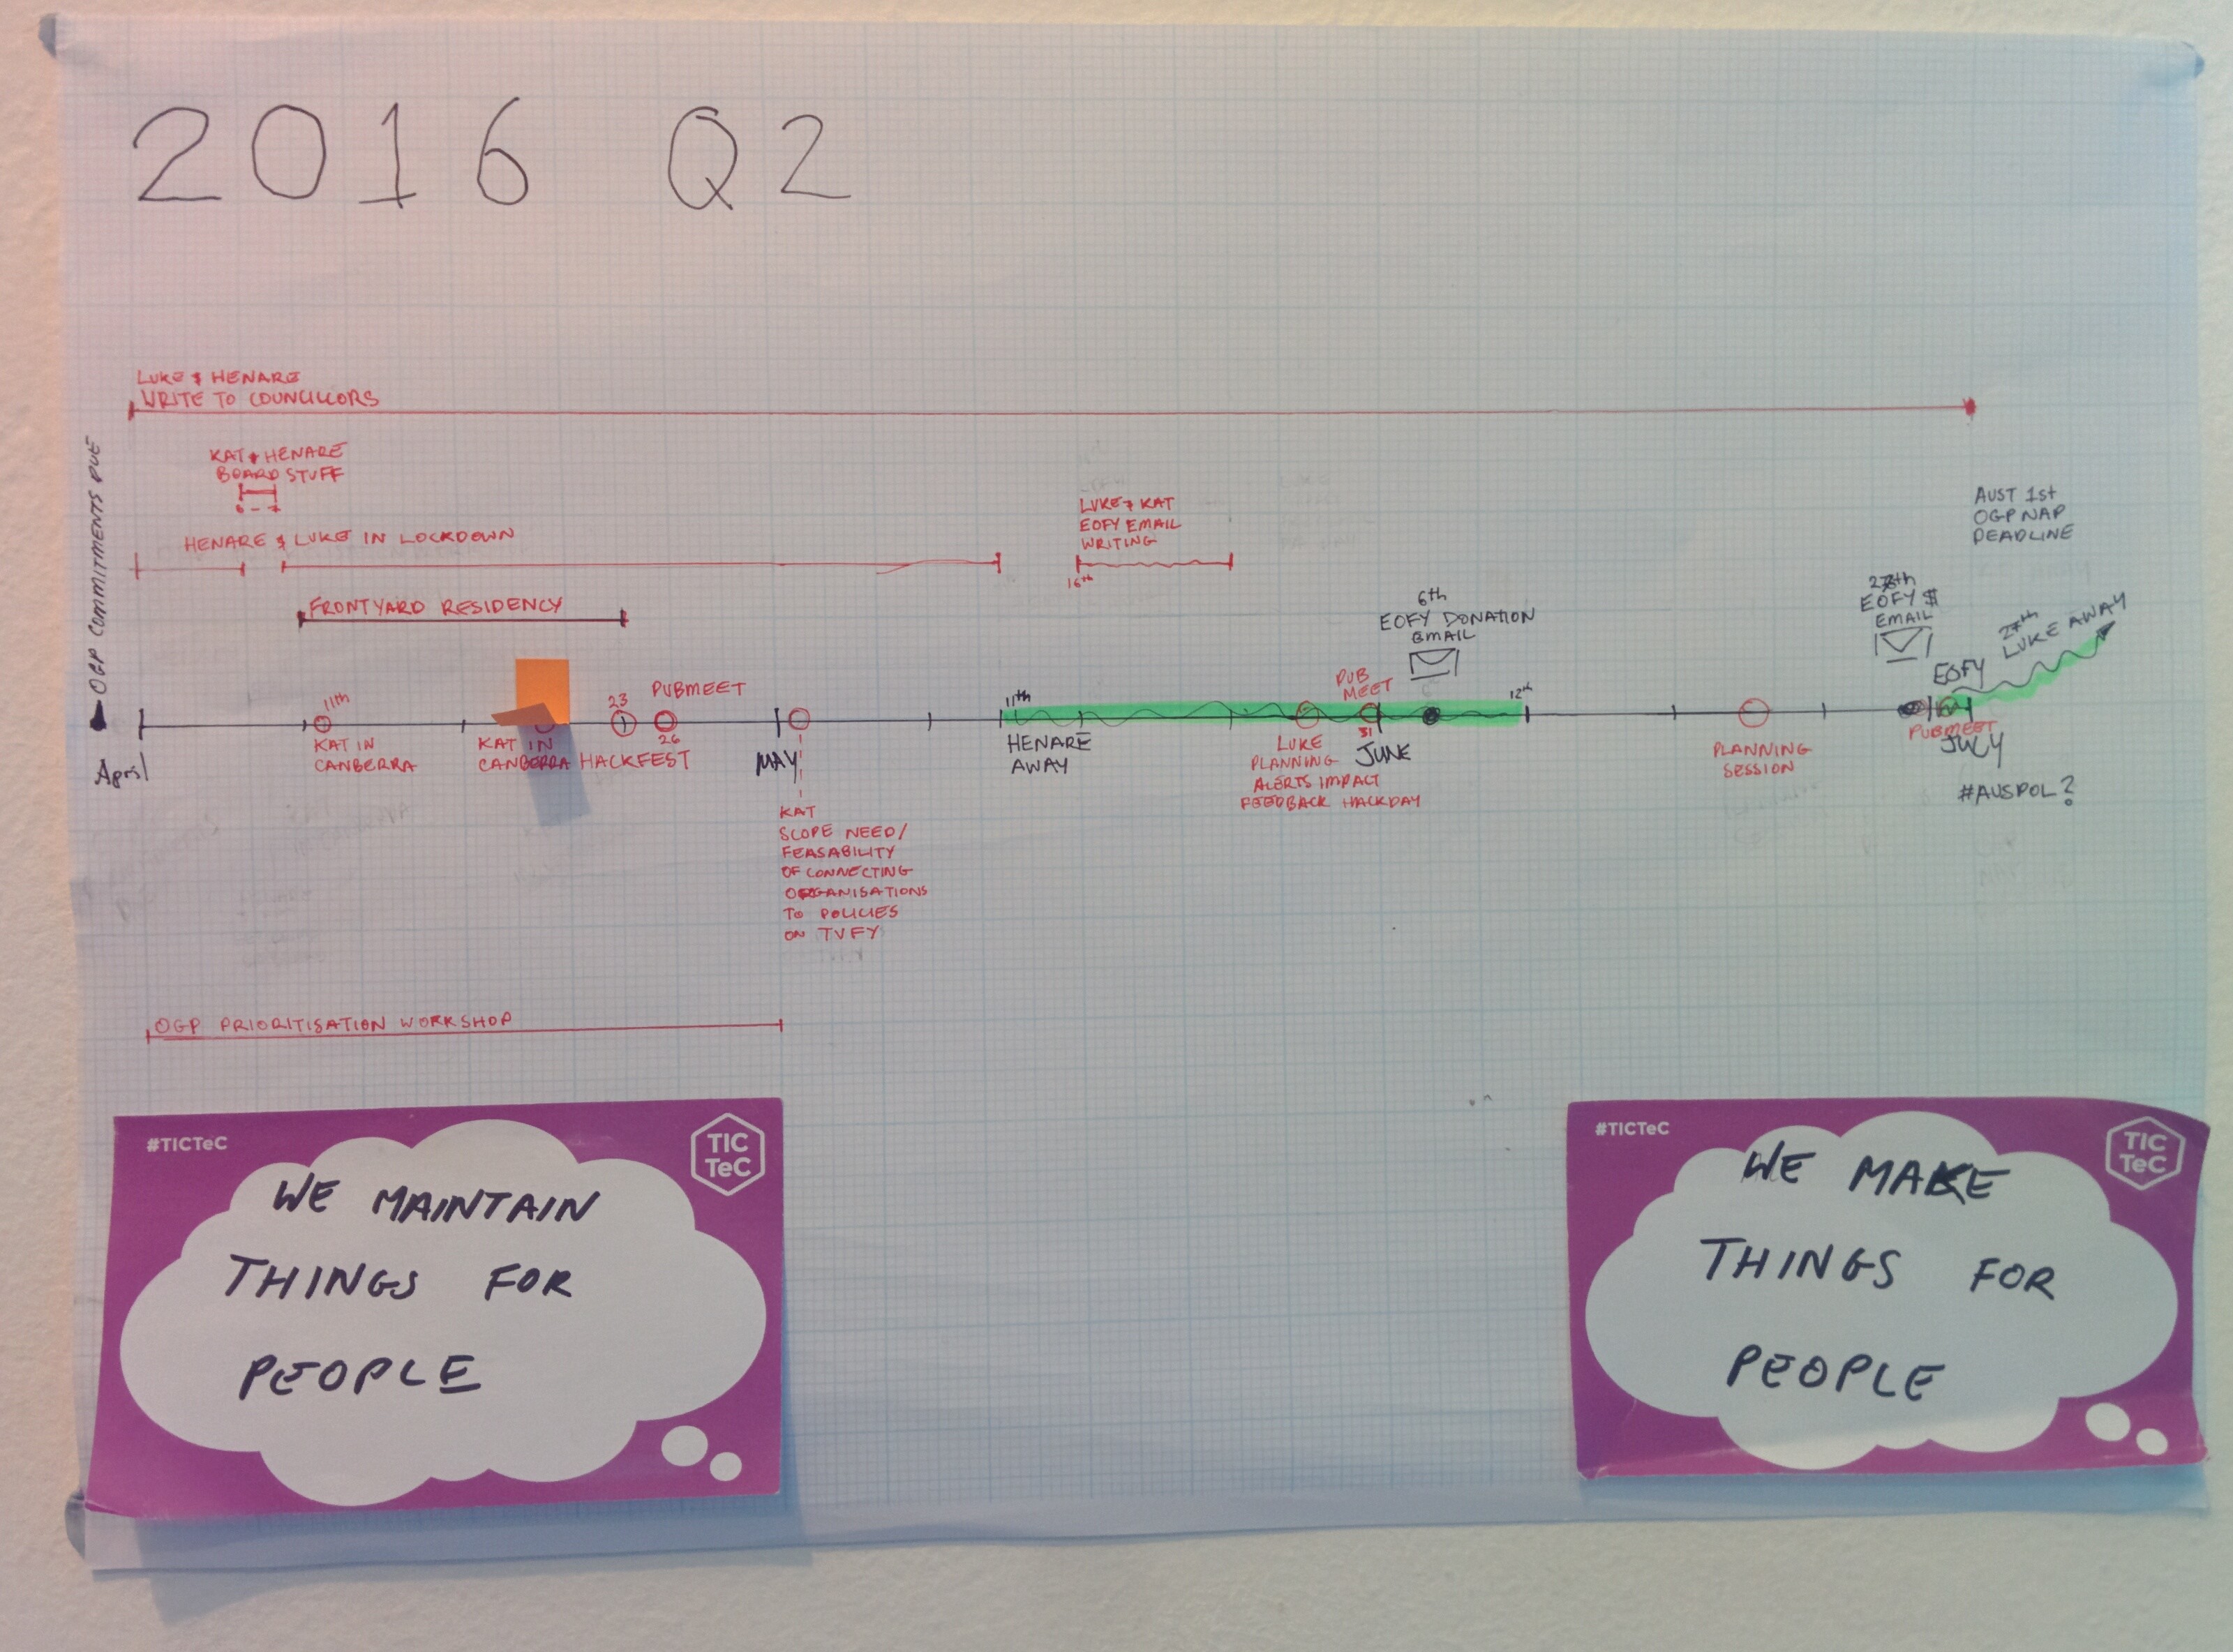 Photo of the timeline of our plan for Q2 2016.